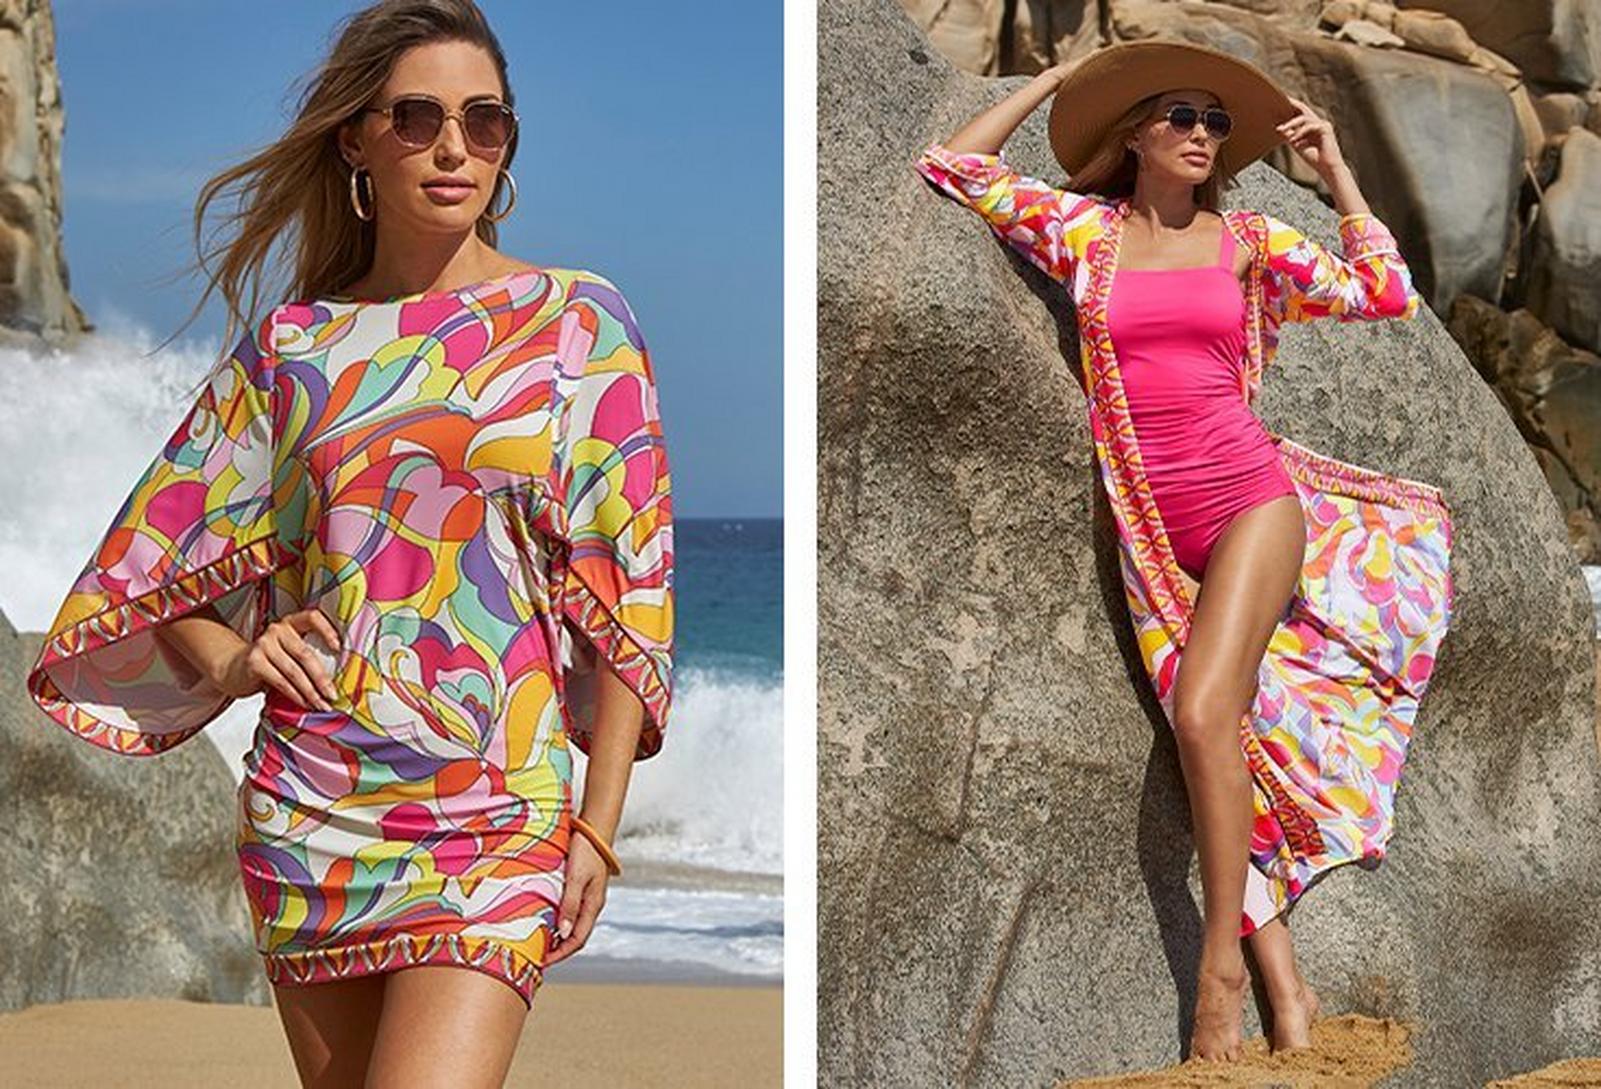 left model wearing a multicolored paisley print tunic cover up and sunglasses. right model wearing a multicolored paisley print duster cover up, pink tankini, sunglasses, and tan floppy hat.